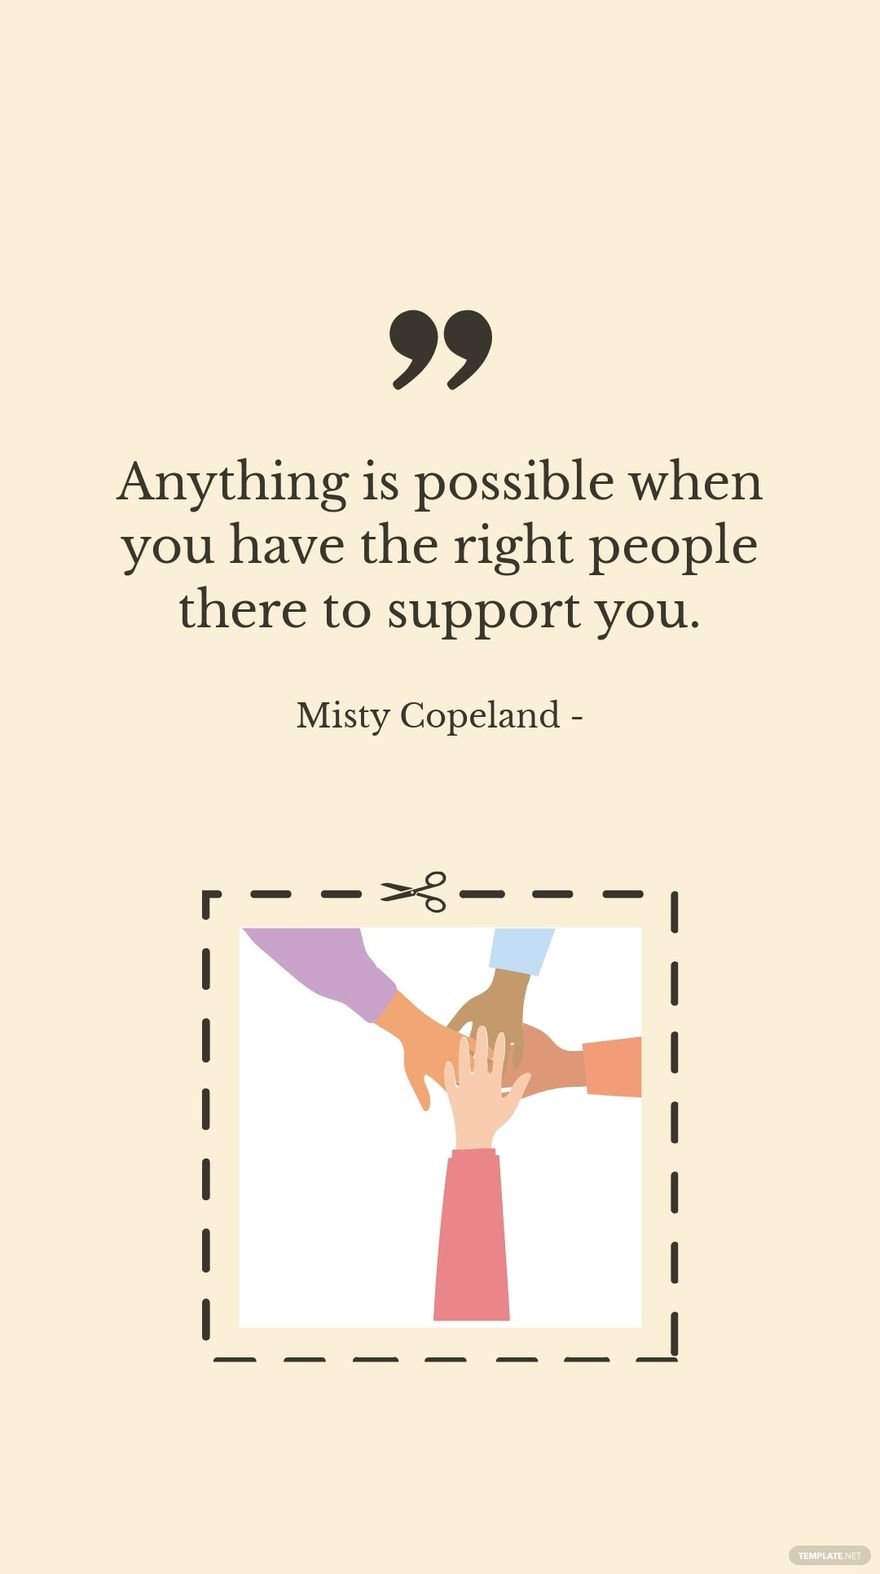 Misty Copeland - Anything is possible when you have the right people there to support you.